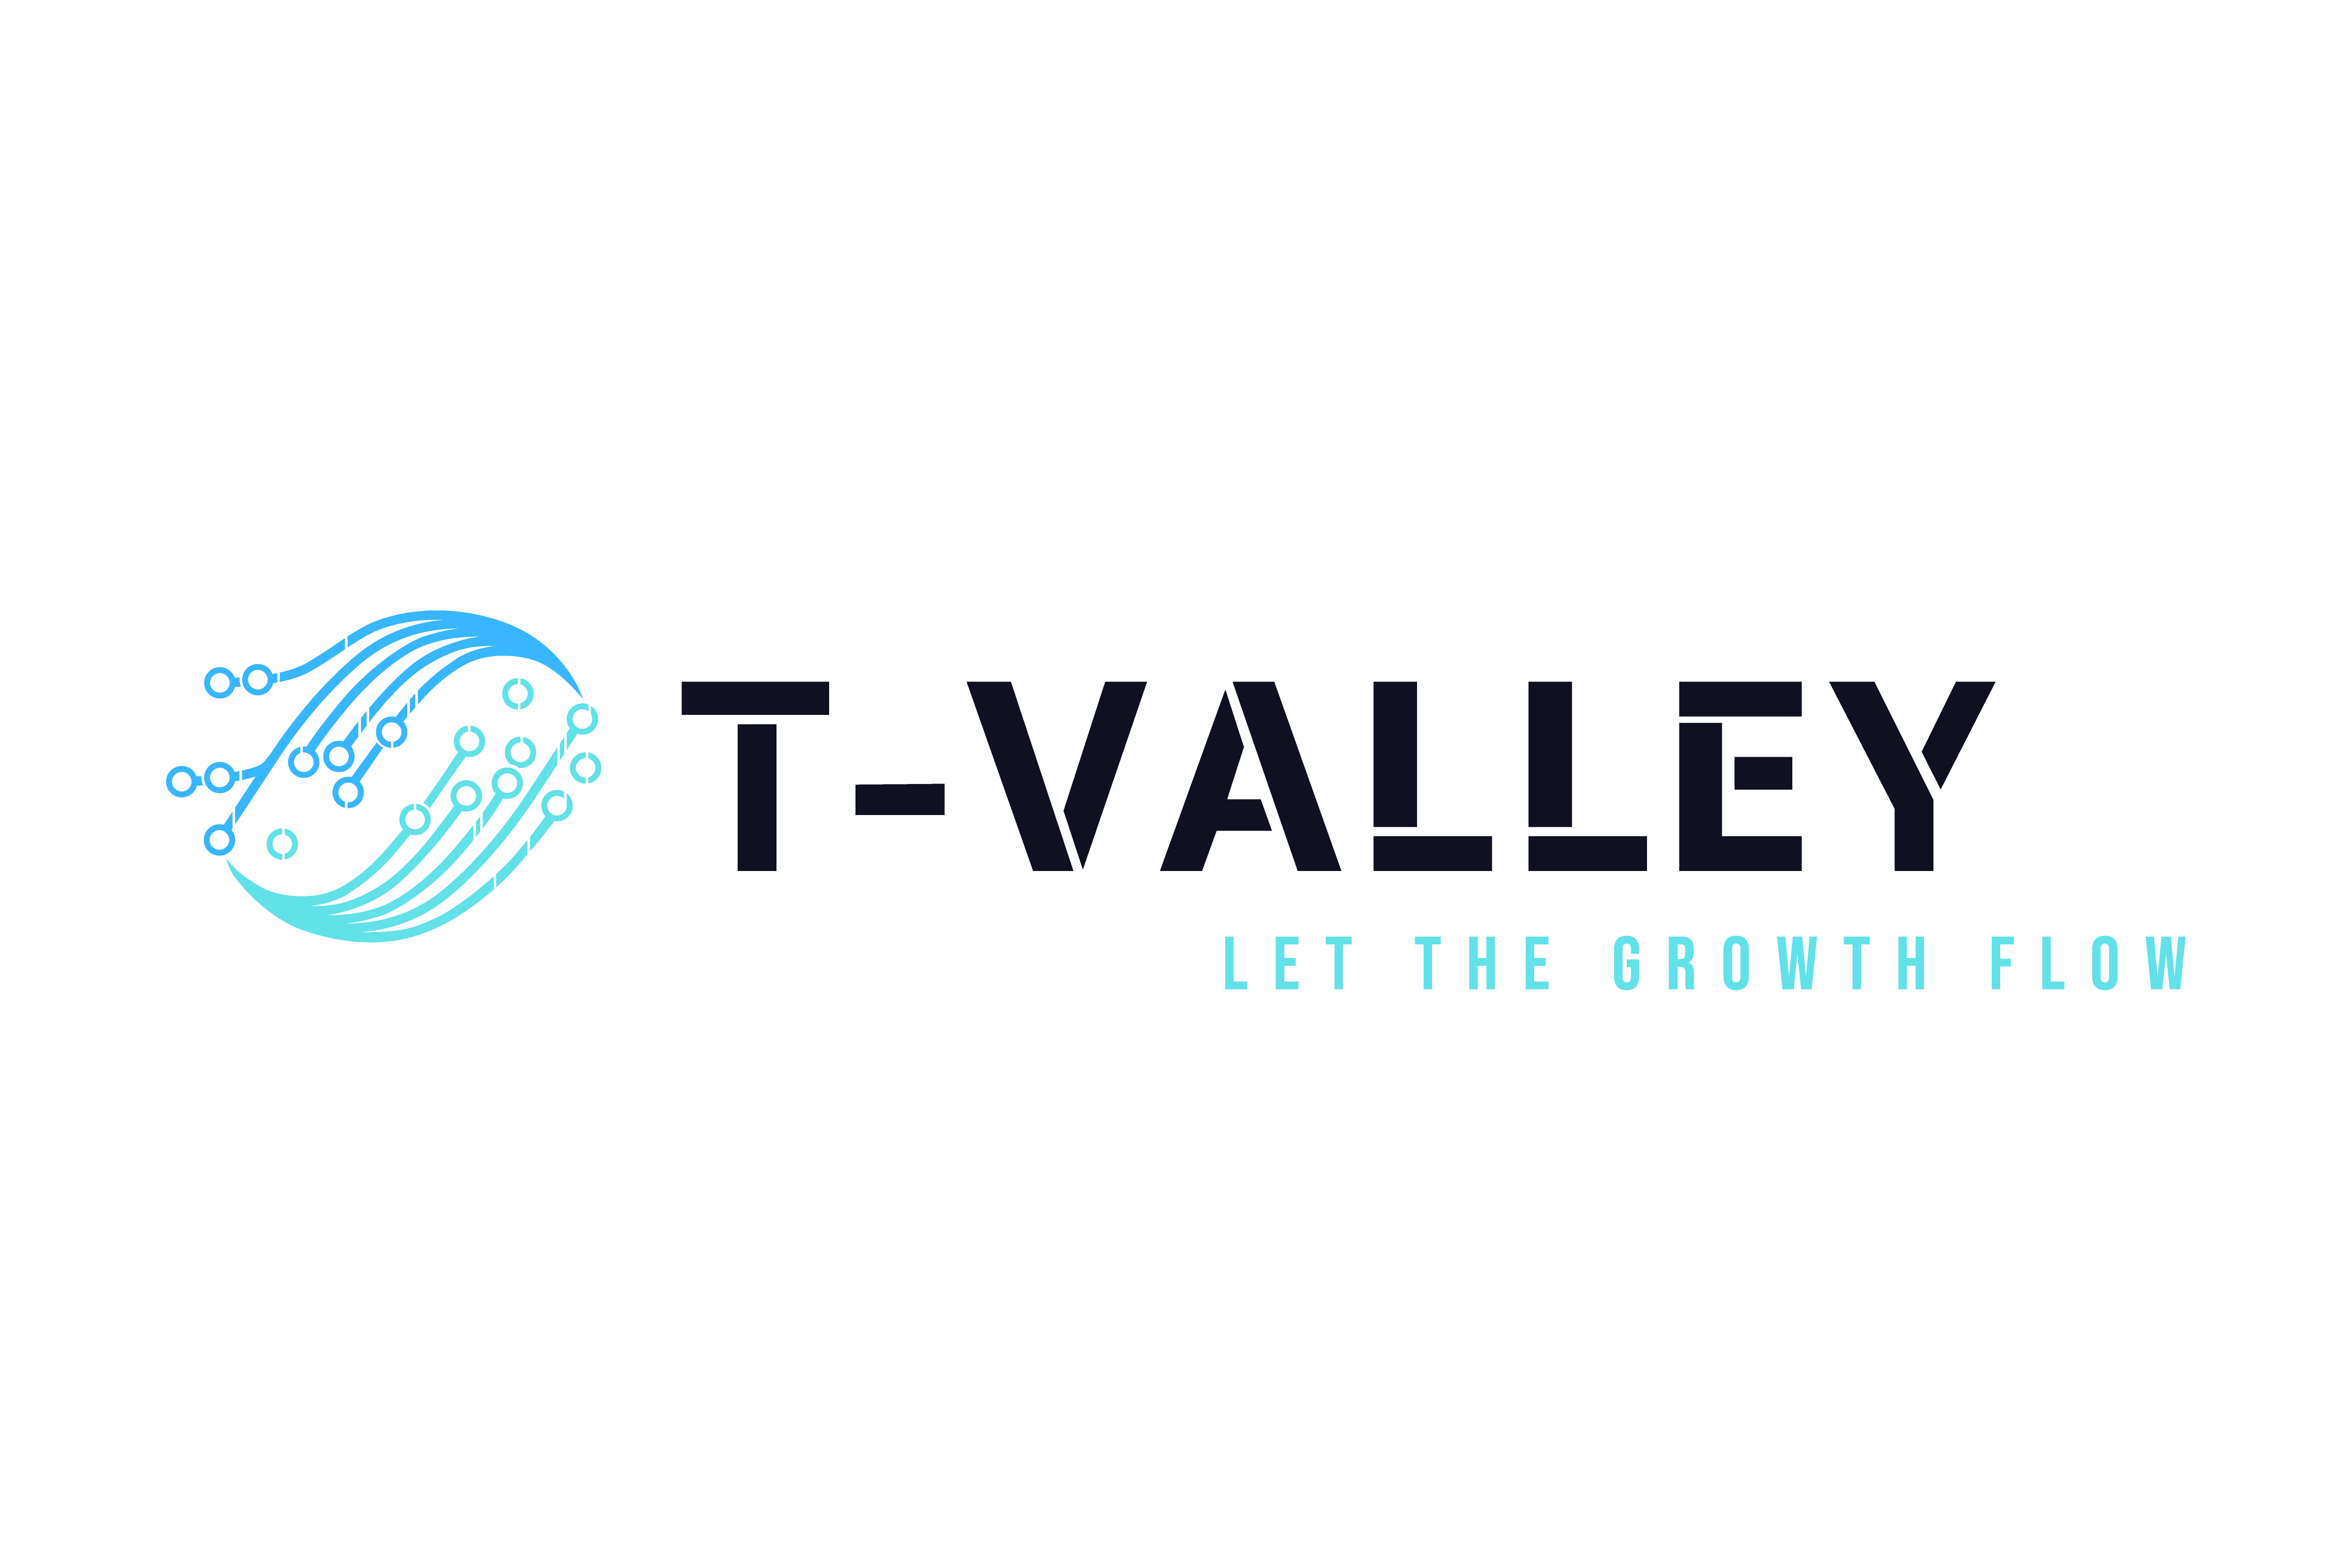 T-Valley